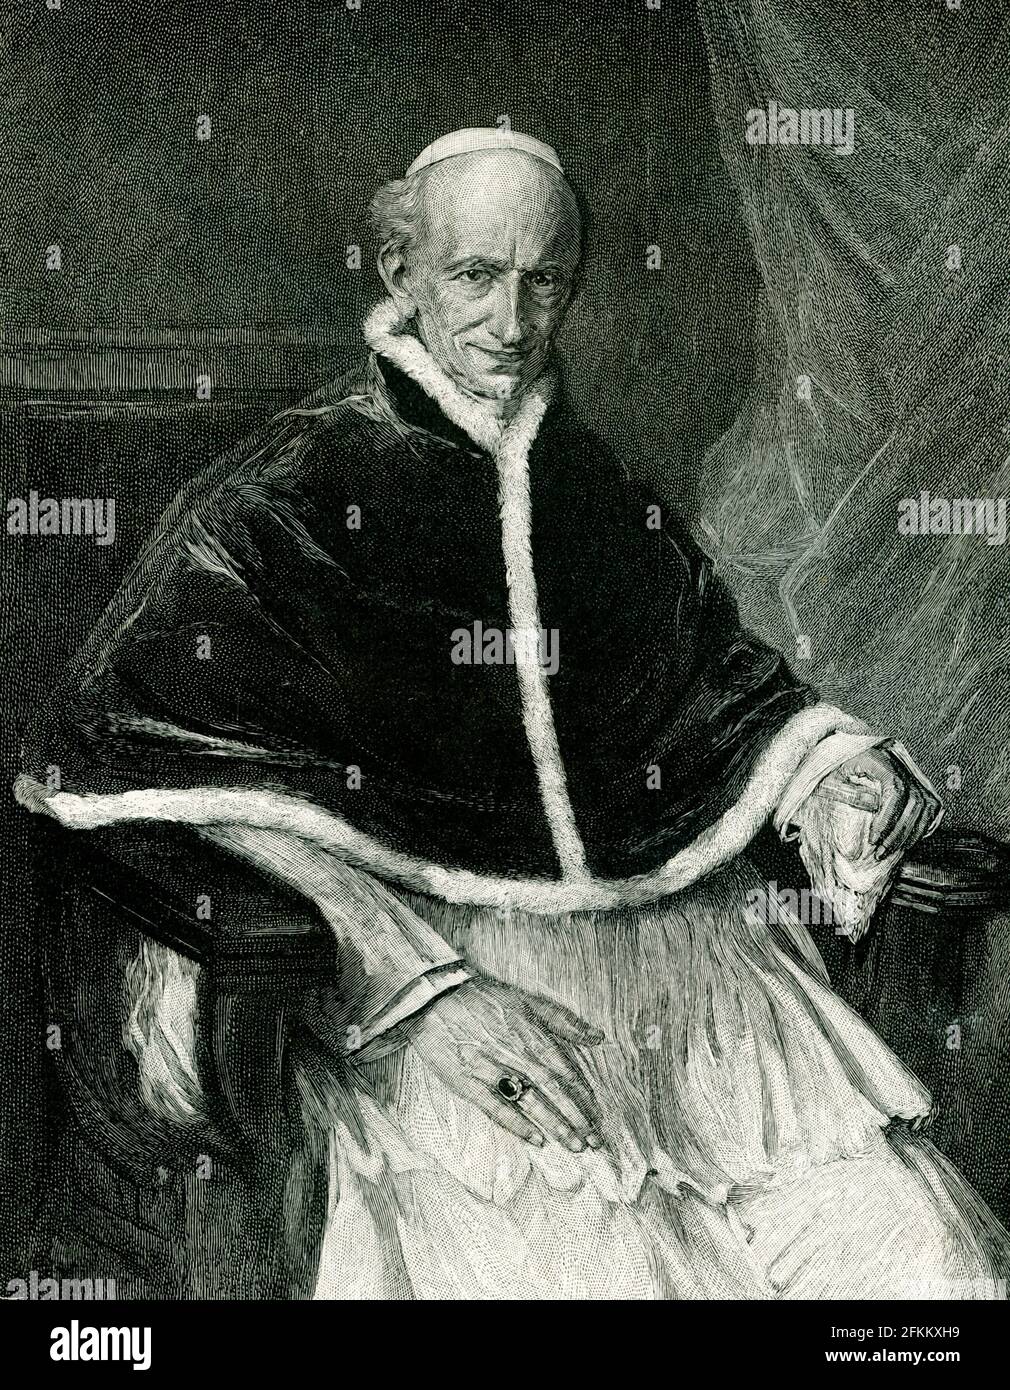 The 1896 caption reads: “ Pope Leo XIII engraved by T Johnson after photograph of painting by Lenbach in Munich.” Pope Leo III was the bishop of Rome and ruler of the Papal States from 26 December 795 to his death. Protected by Charlemagne from the supporters of his predecessor, Adrian I, Leo subsequently strengthened Charlemagne's position by crowning him emperor. Stock Photo